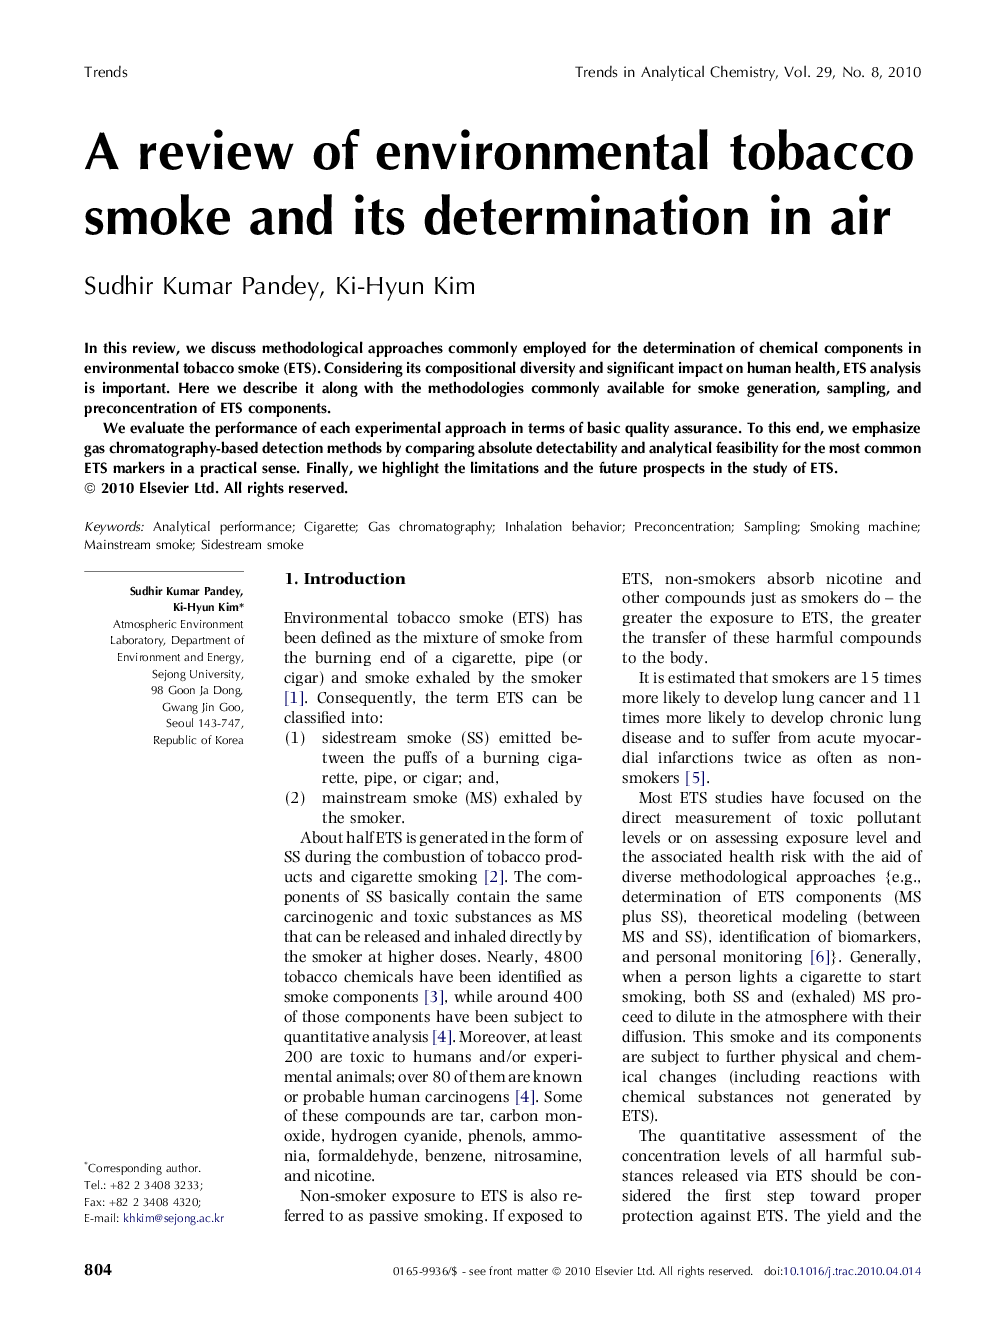 A review of environmental tobacco smoke and its determination in air